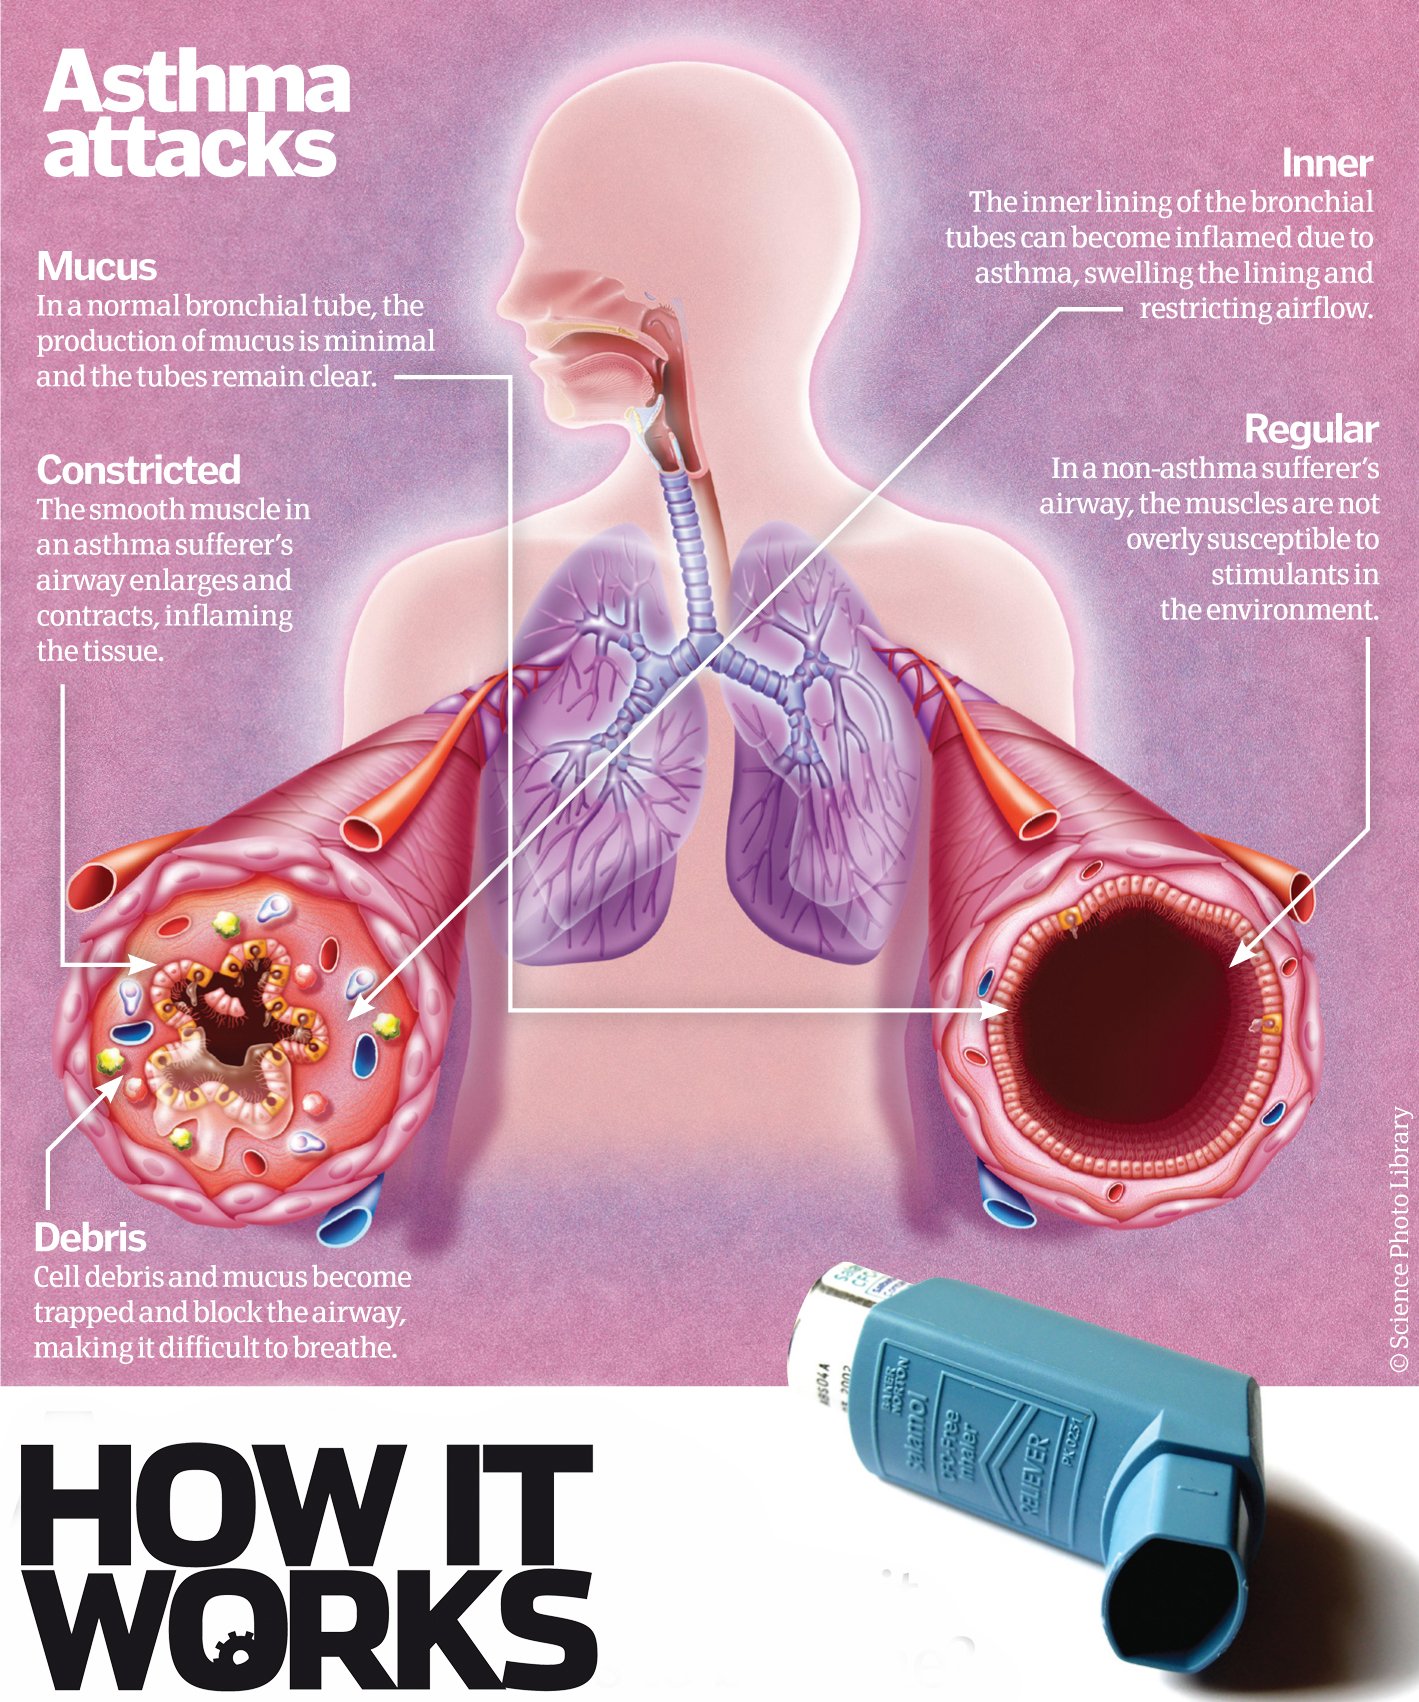 Why does asthma make it difficult to breathe?